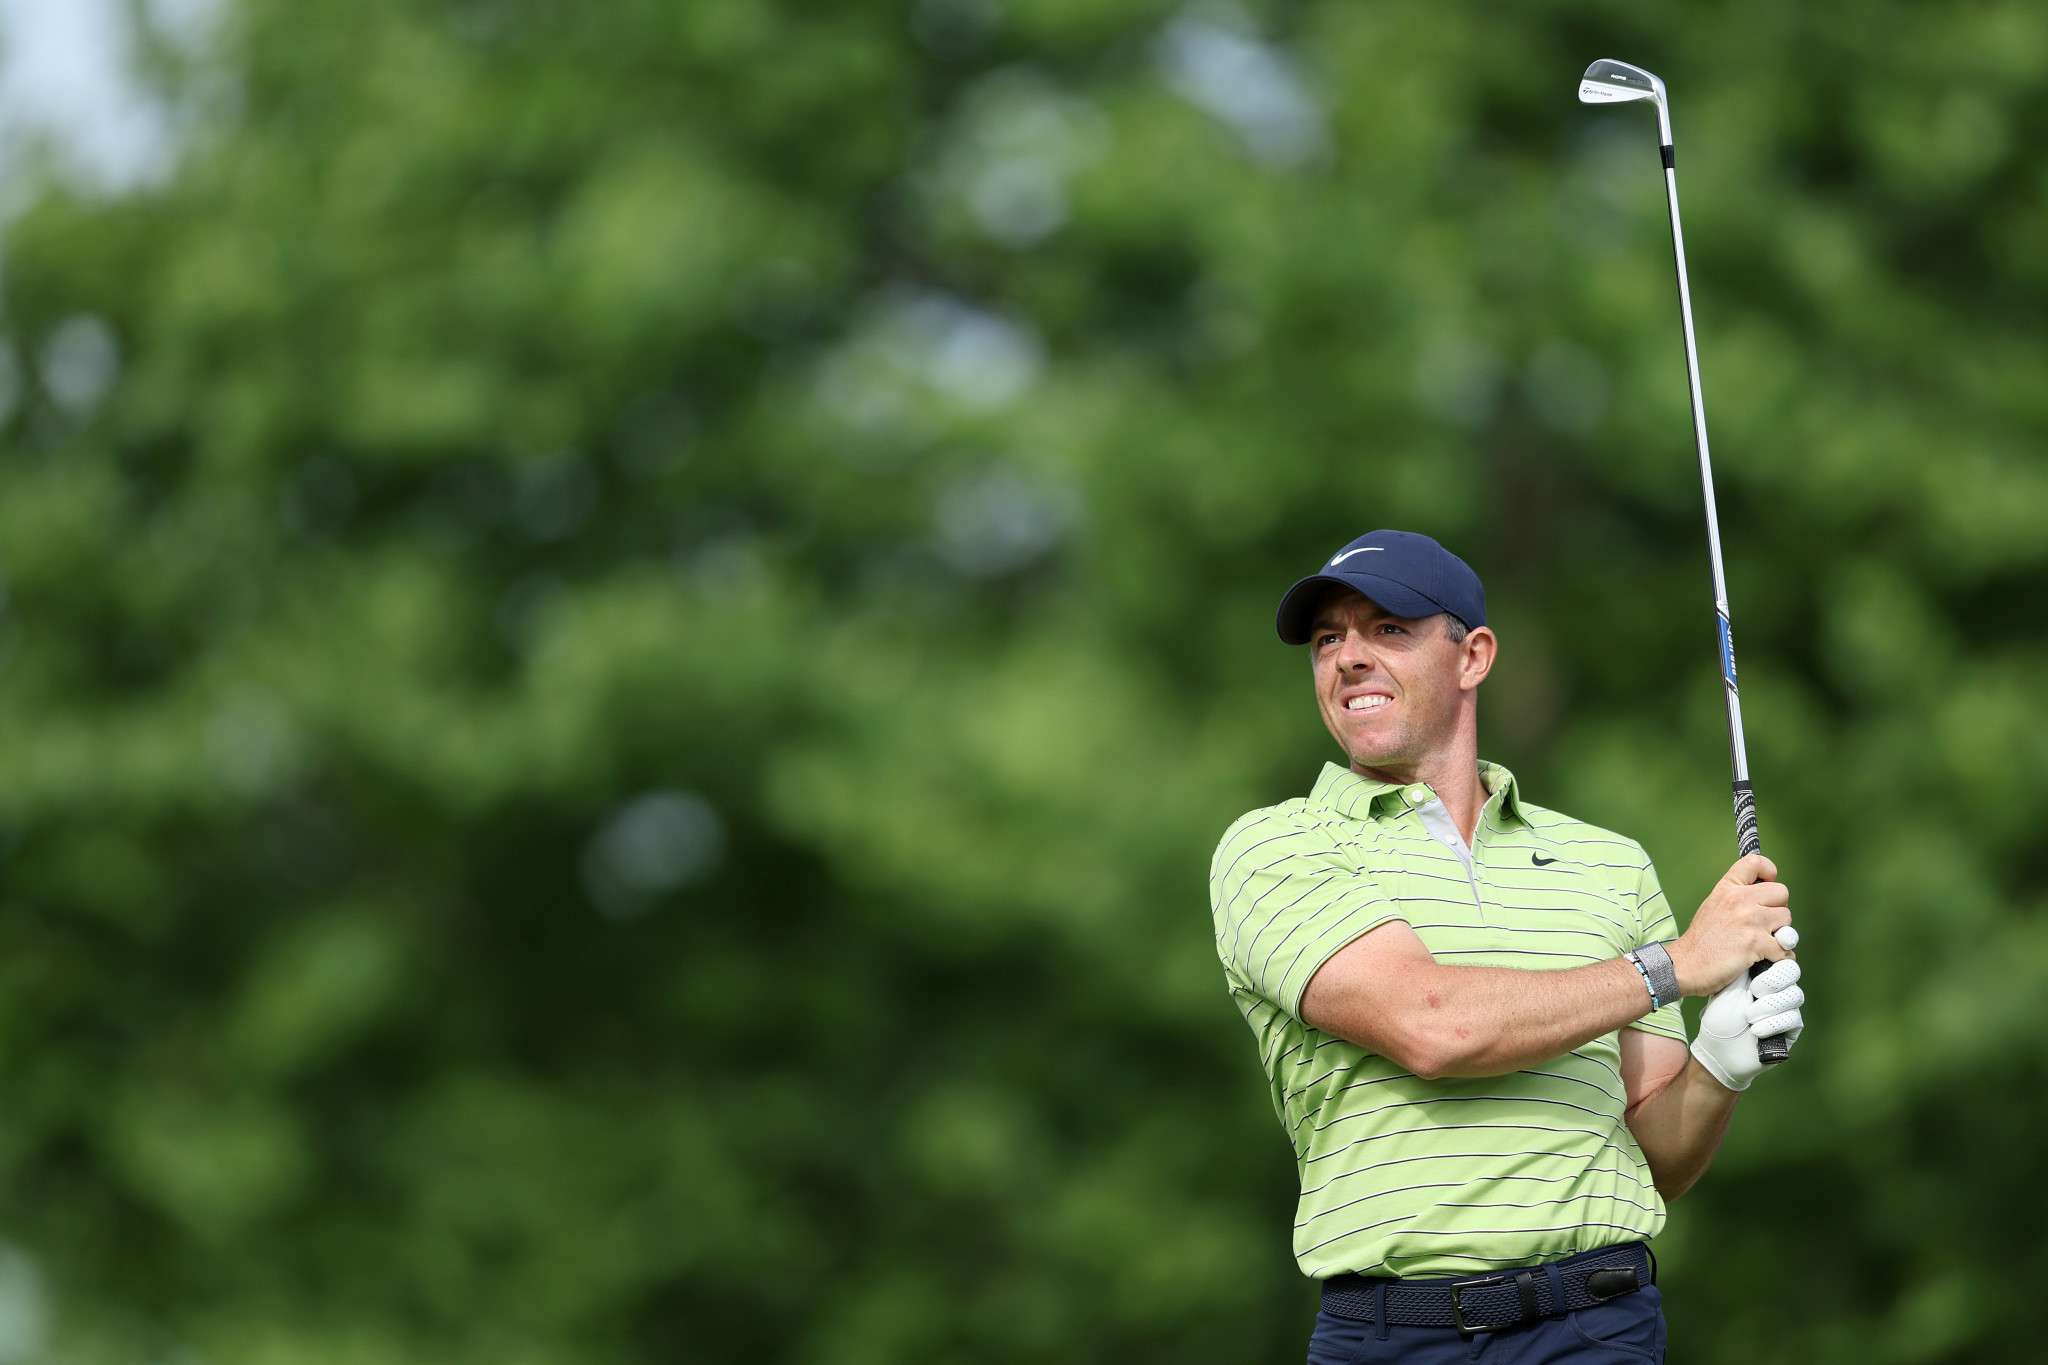 Northern Ireland's Rory McIlroy is still in search of a first victory at the Masters, the only major he is yet to win, after finishing as runner-up last year ©Getty Images